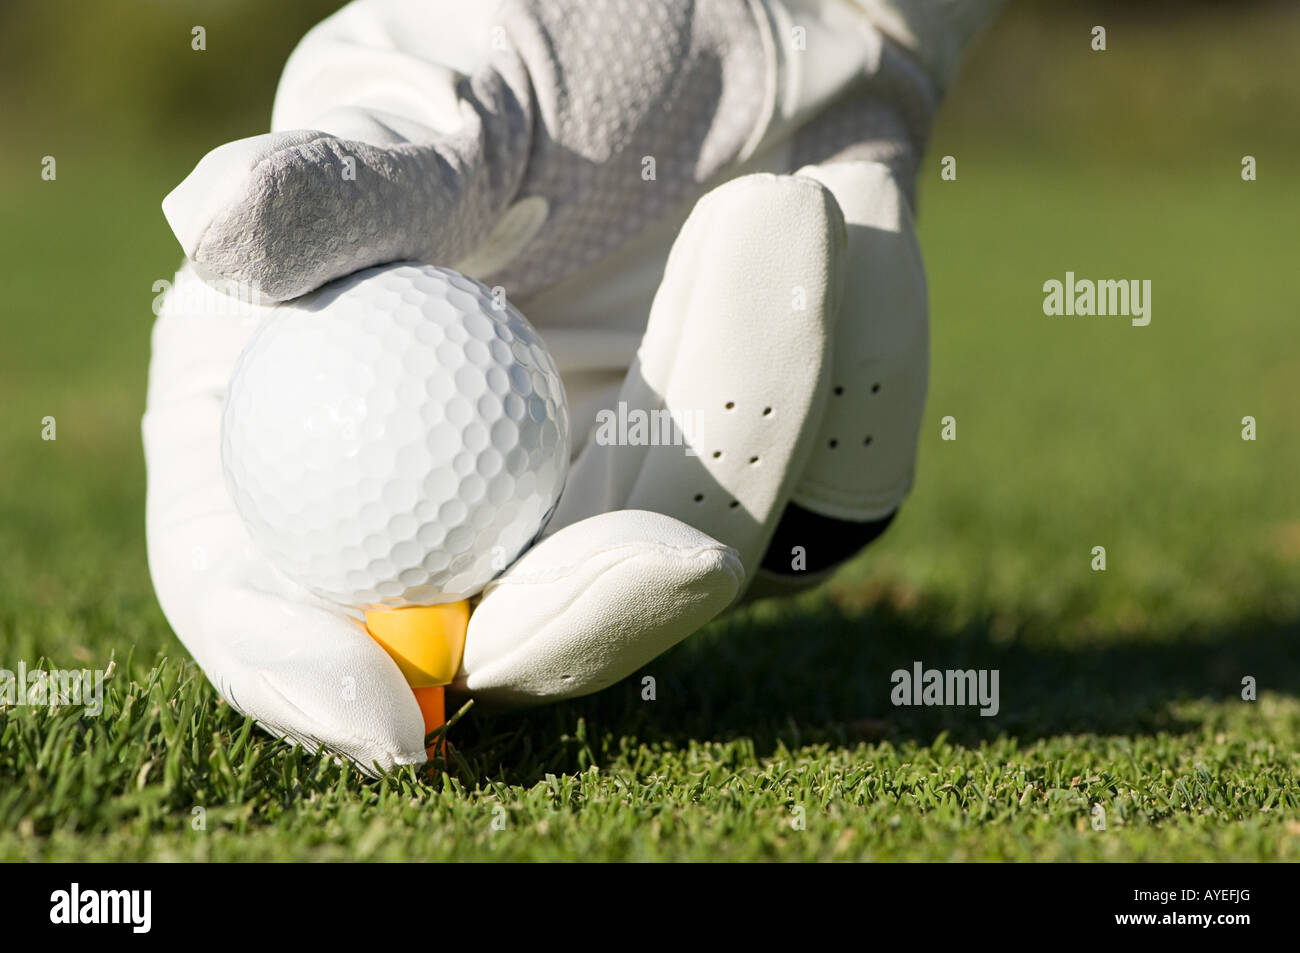 A person placing a golf ball on a tee Stock Photo